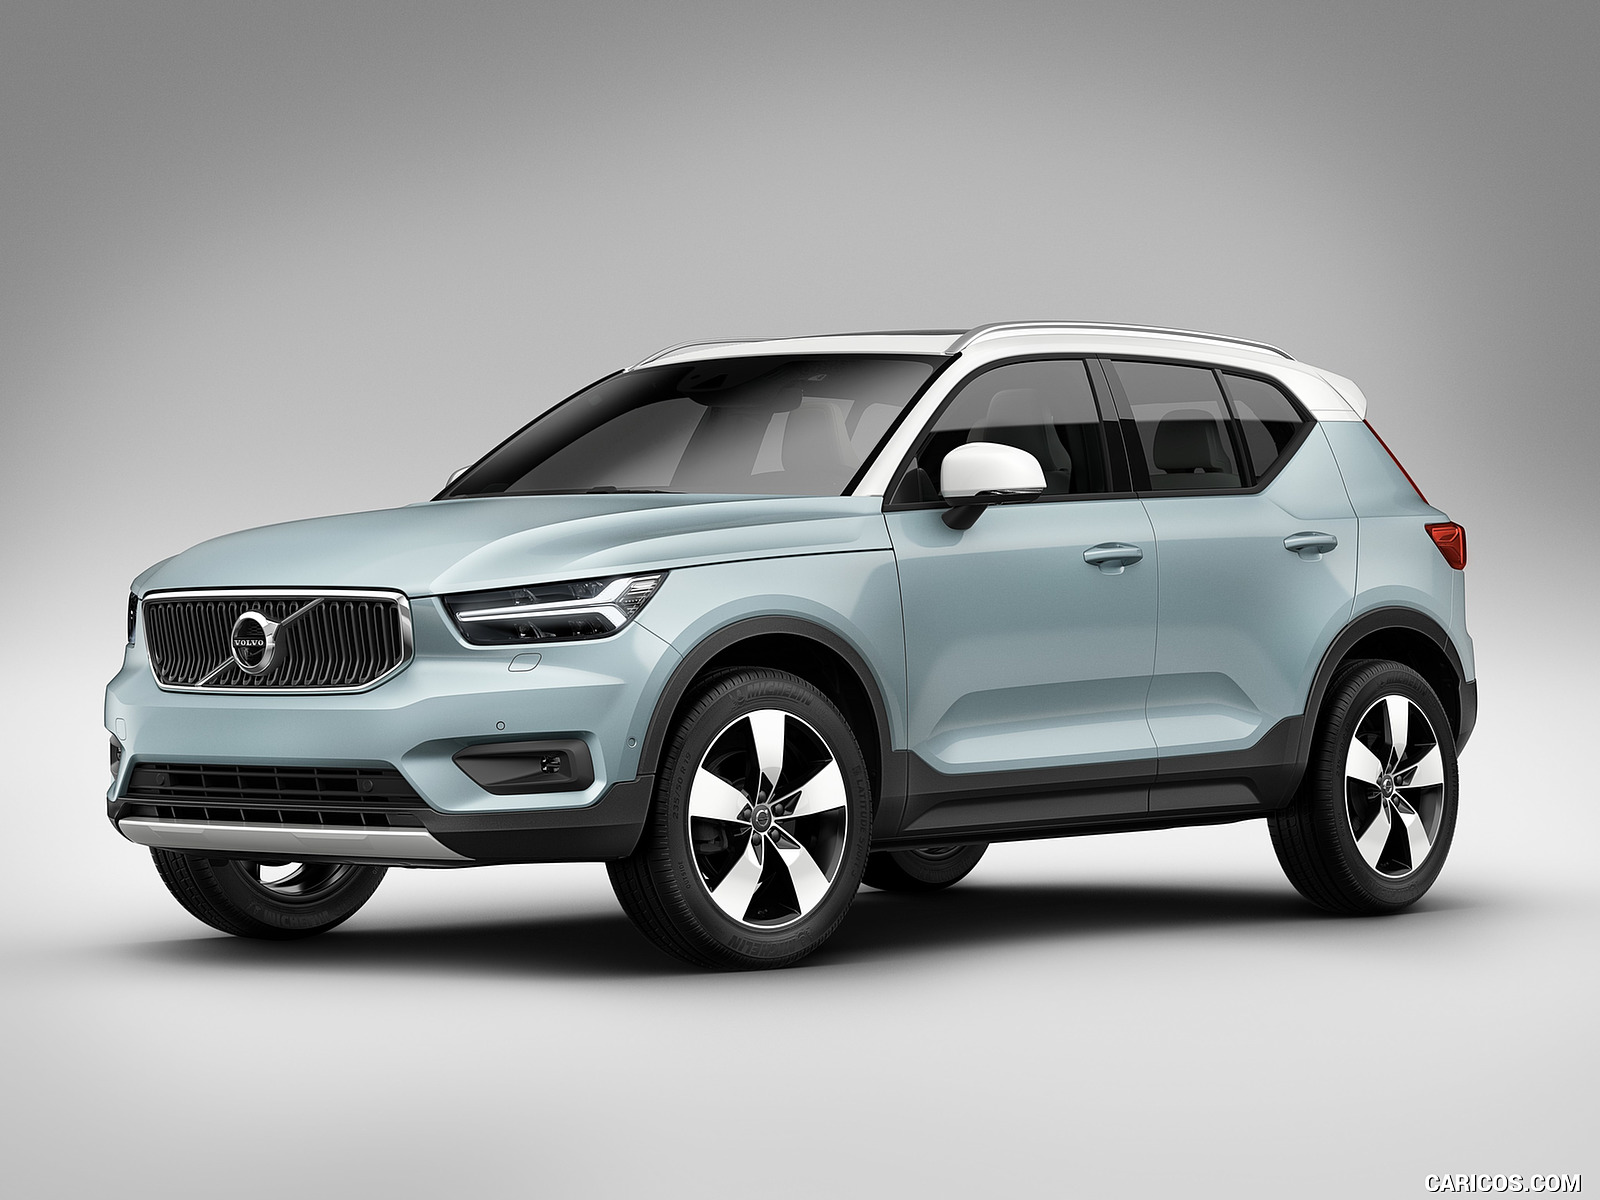 2 New Variants of Volvo XC40 SUV Launched in India - snapshot